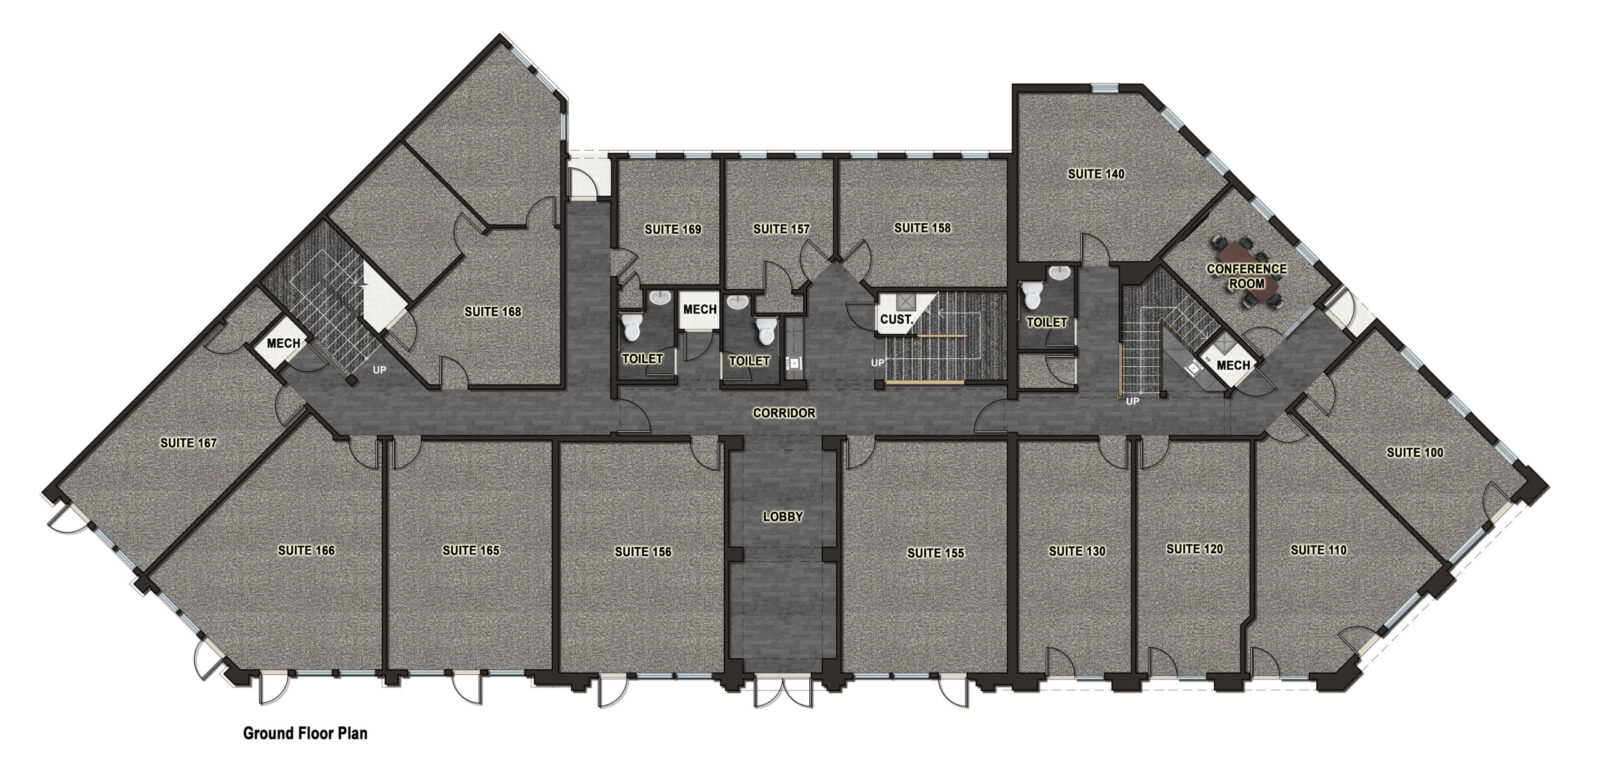 A ground floor plan of several suites